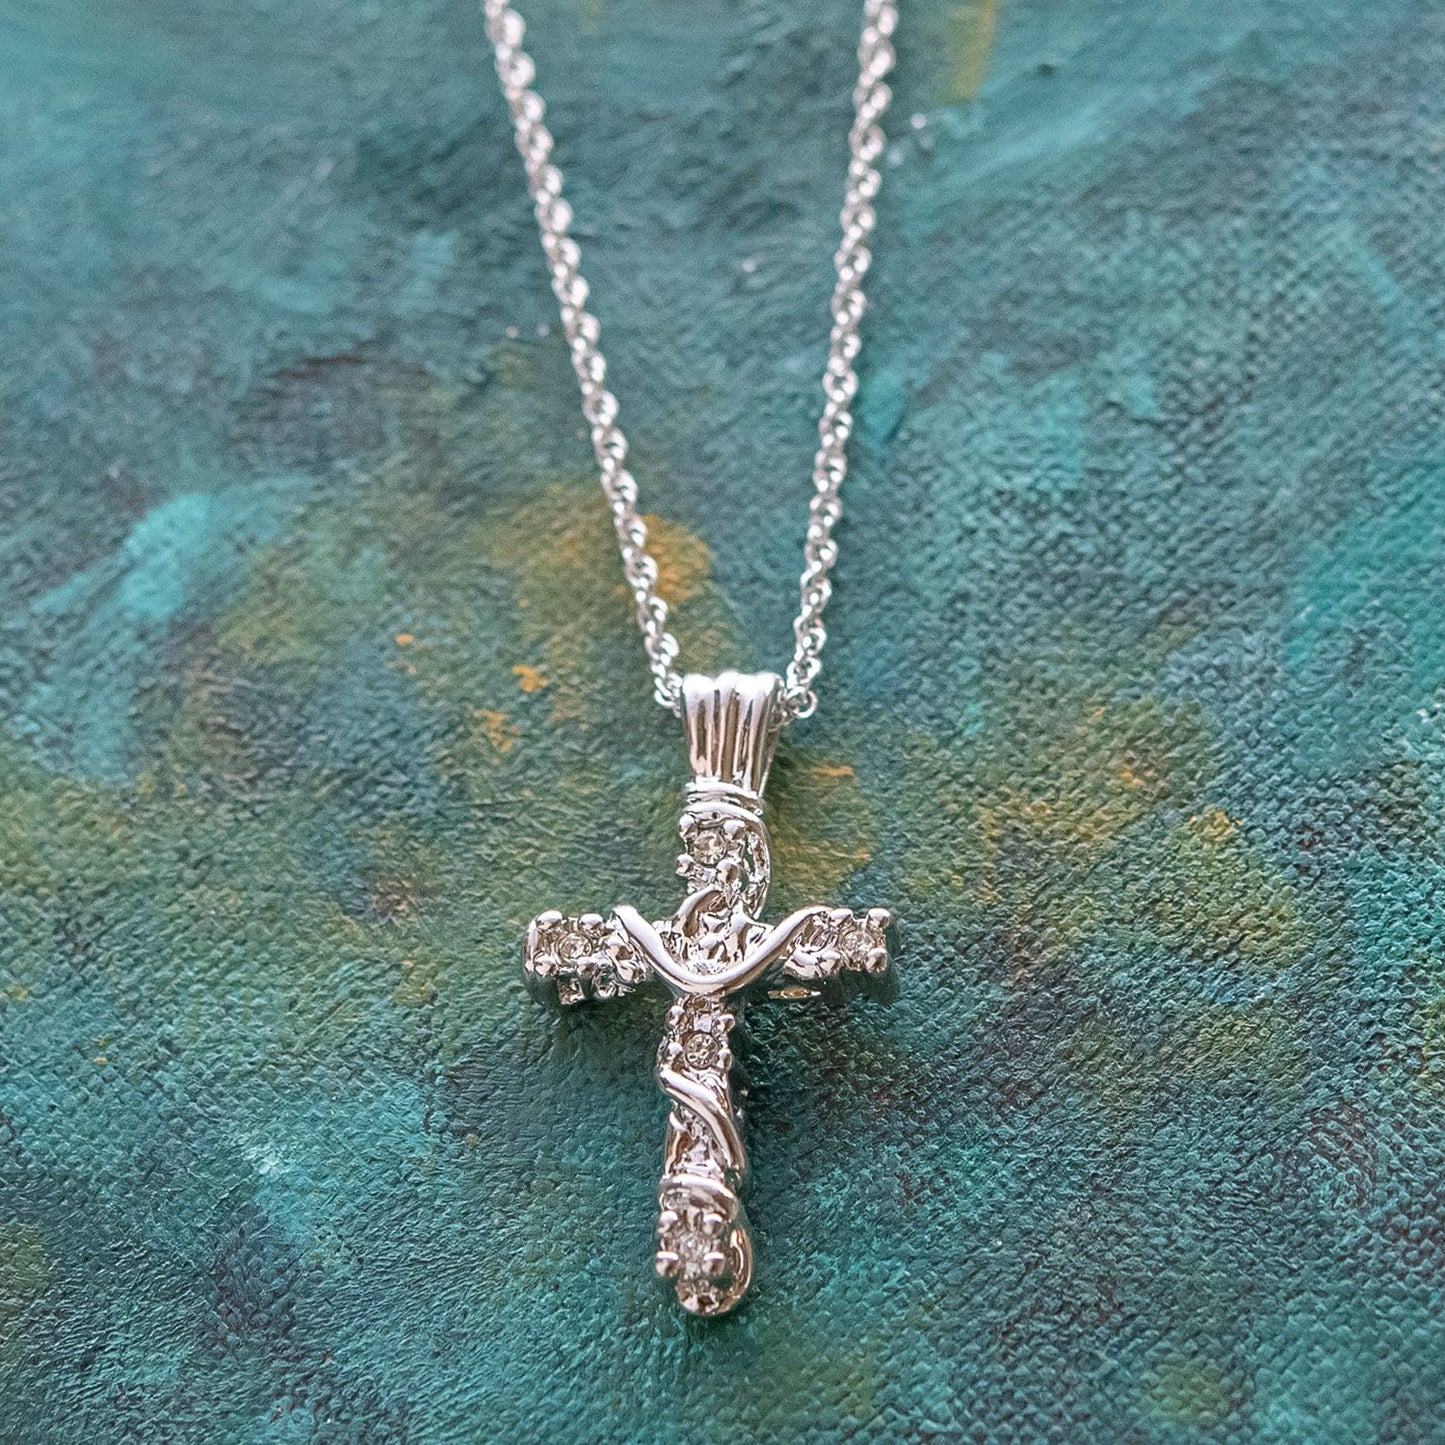 Vintage Cross Pendant with Clear Swarovski Crystals 16 Inch Two Tone Gold Plated Pendant Necklace #N624-YW